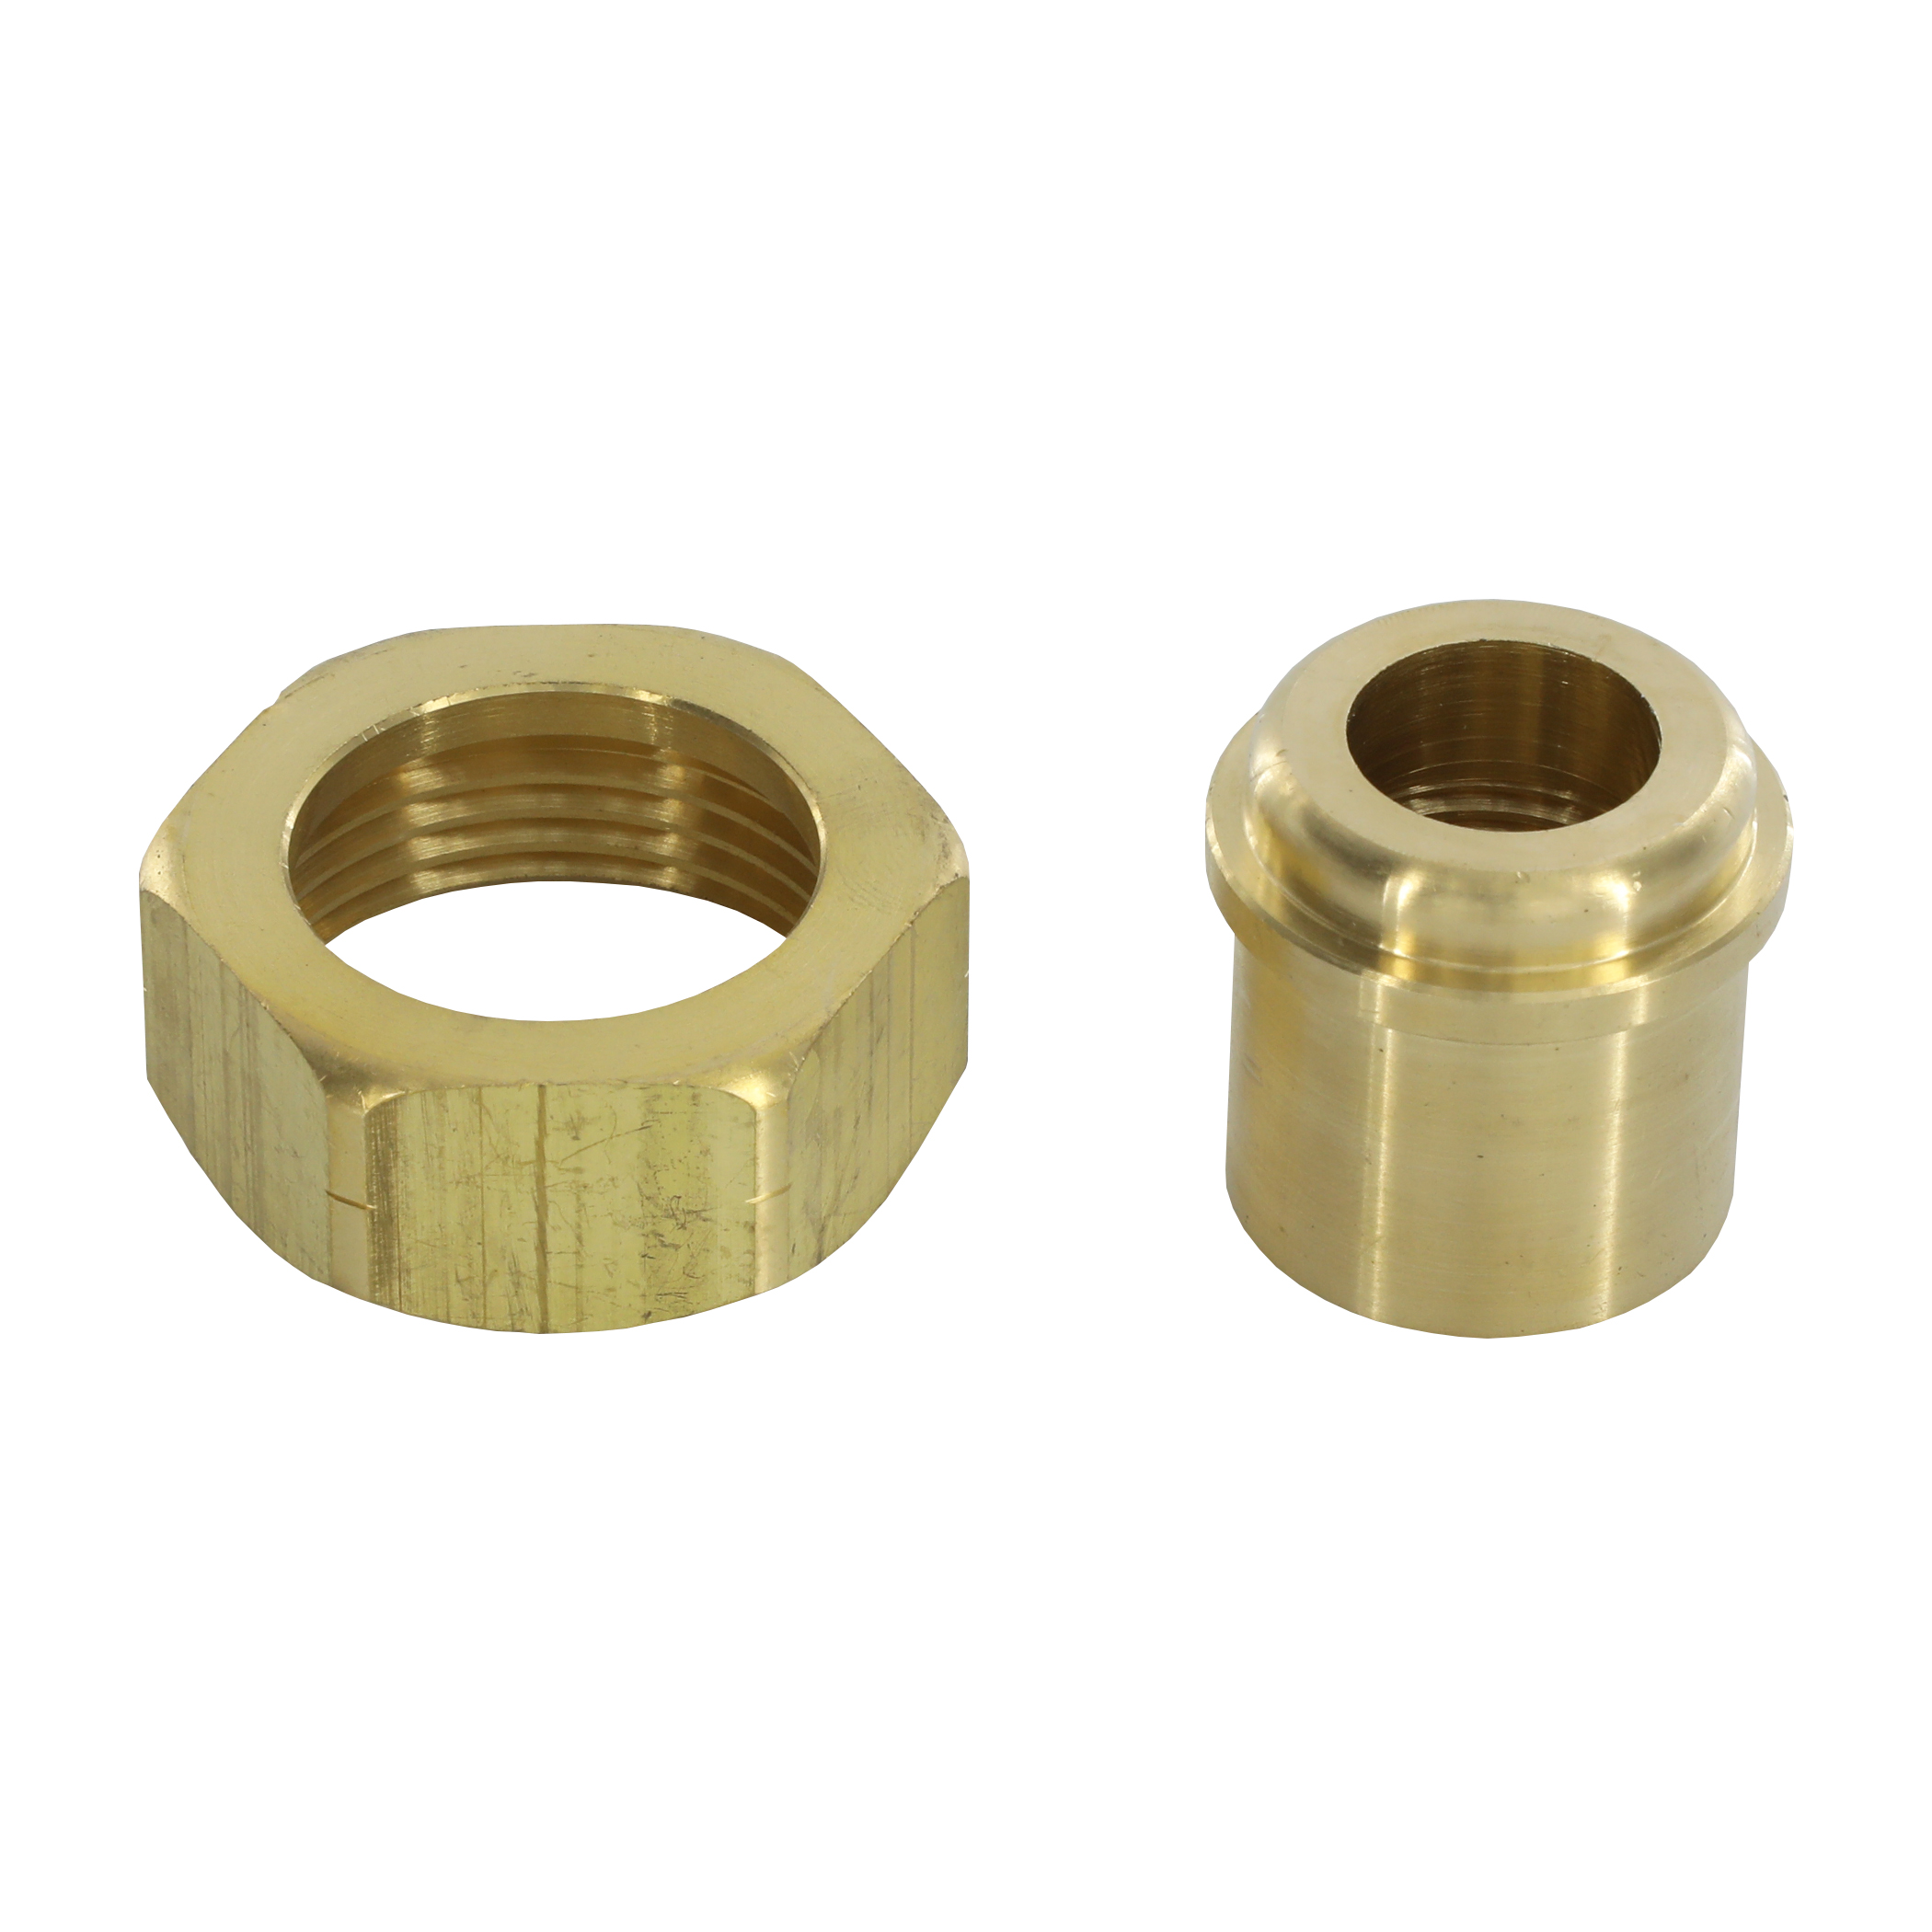 Union Nut for Pfister Faucets